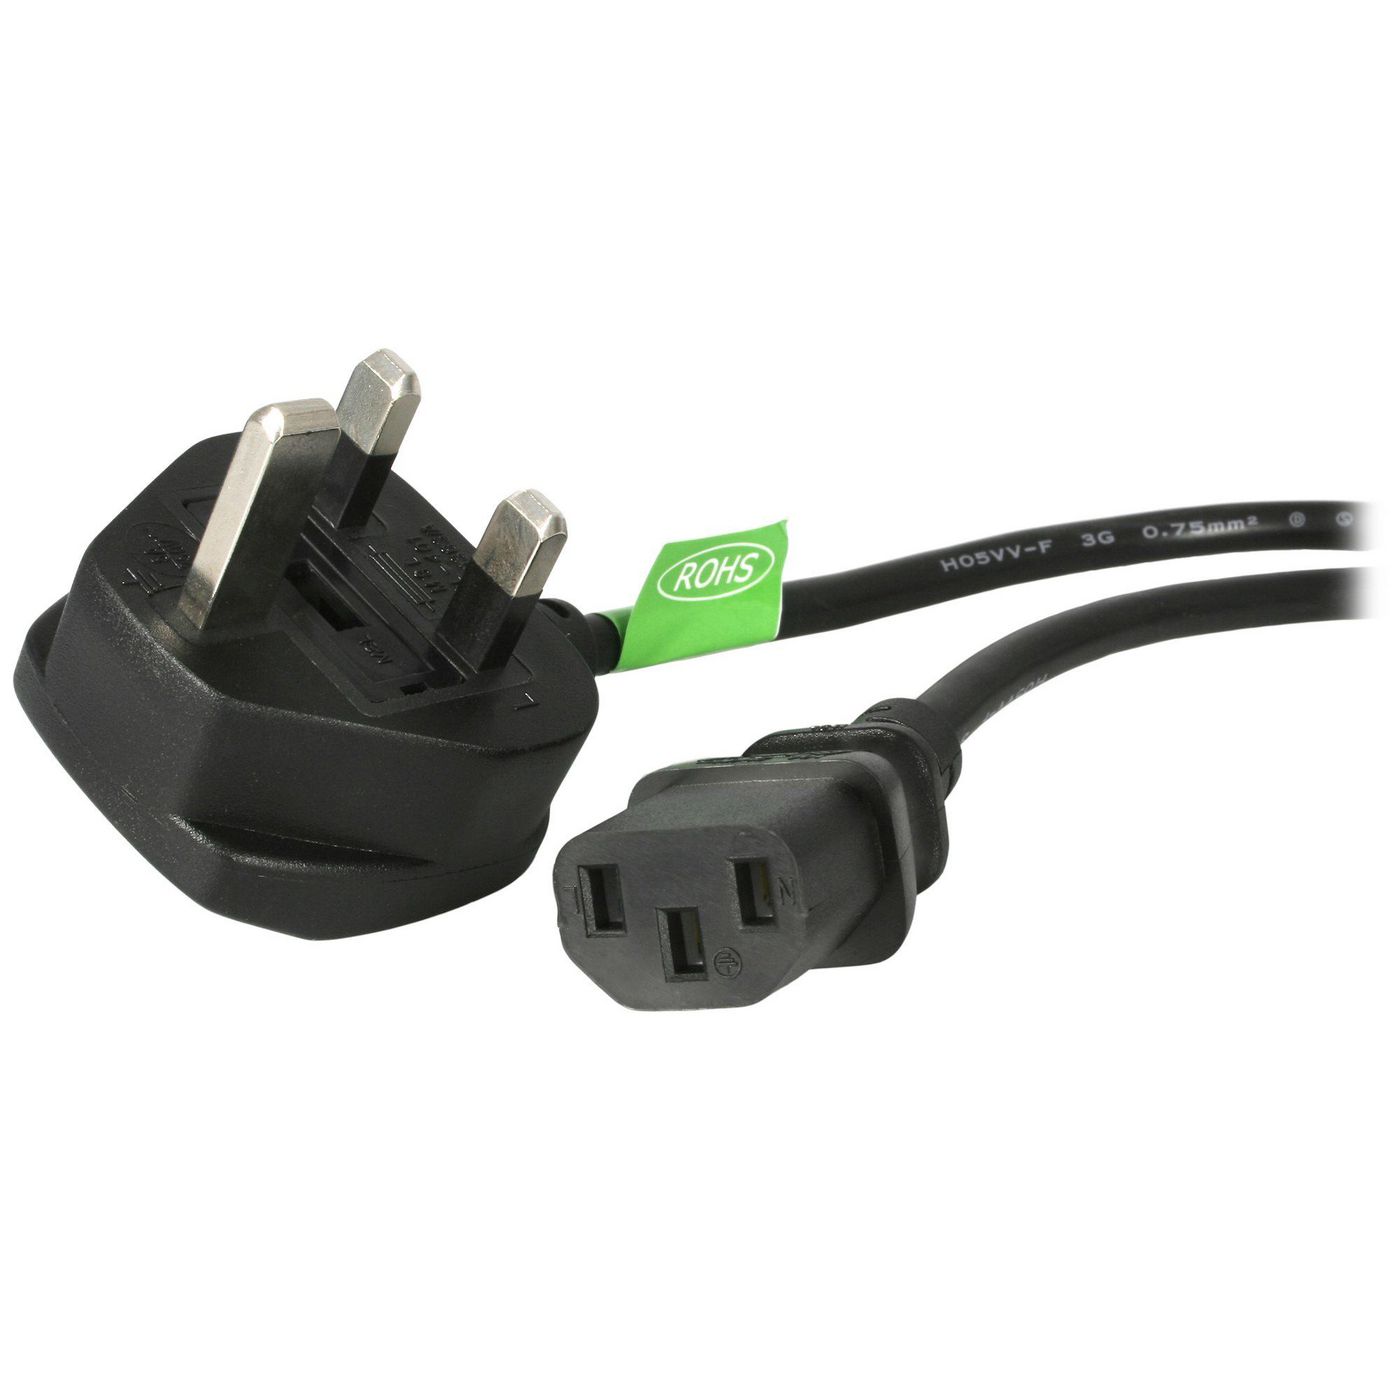 STARTECH.COM 3ft (1m) UK Computer Power Cable, BS 1363 to C13 Power Cord, 18AWG, 10A 250V, Black Rep